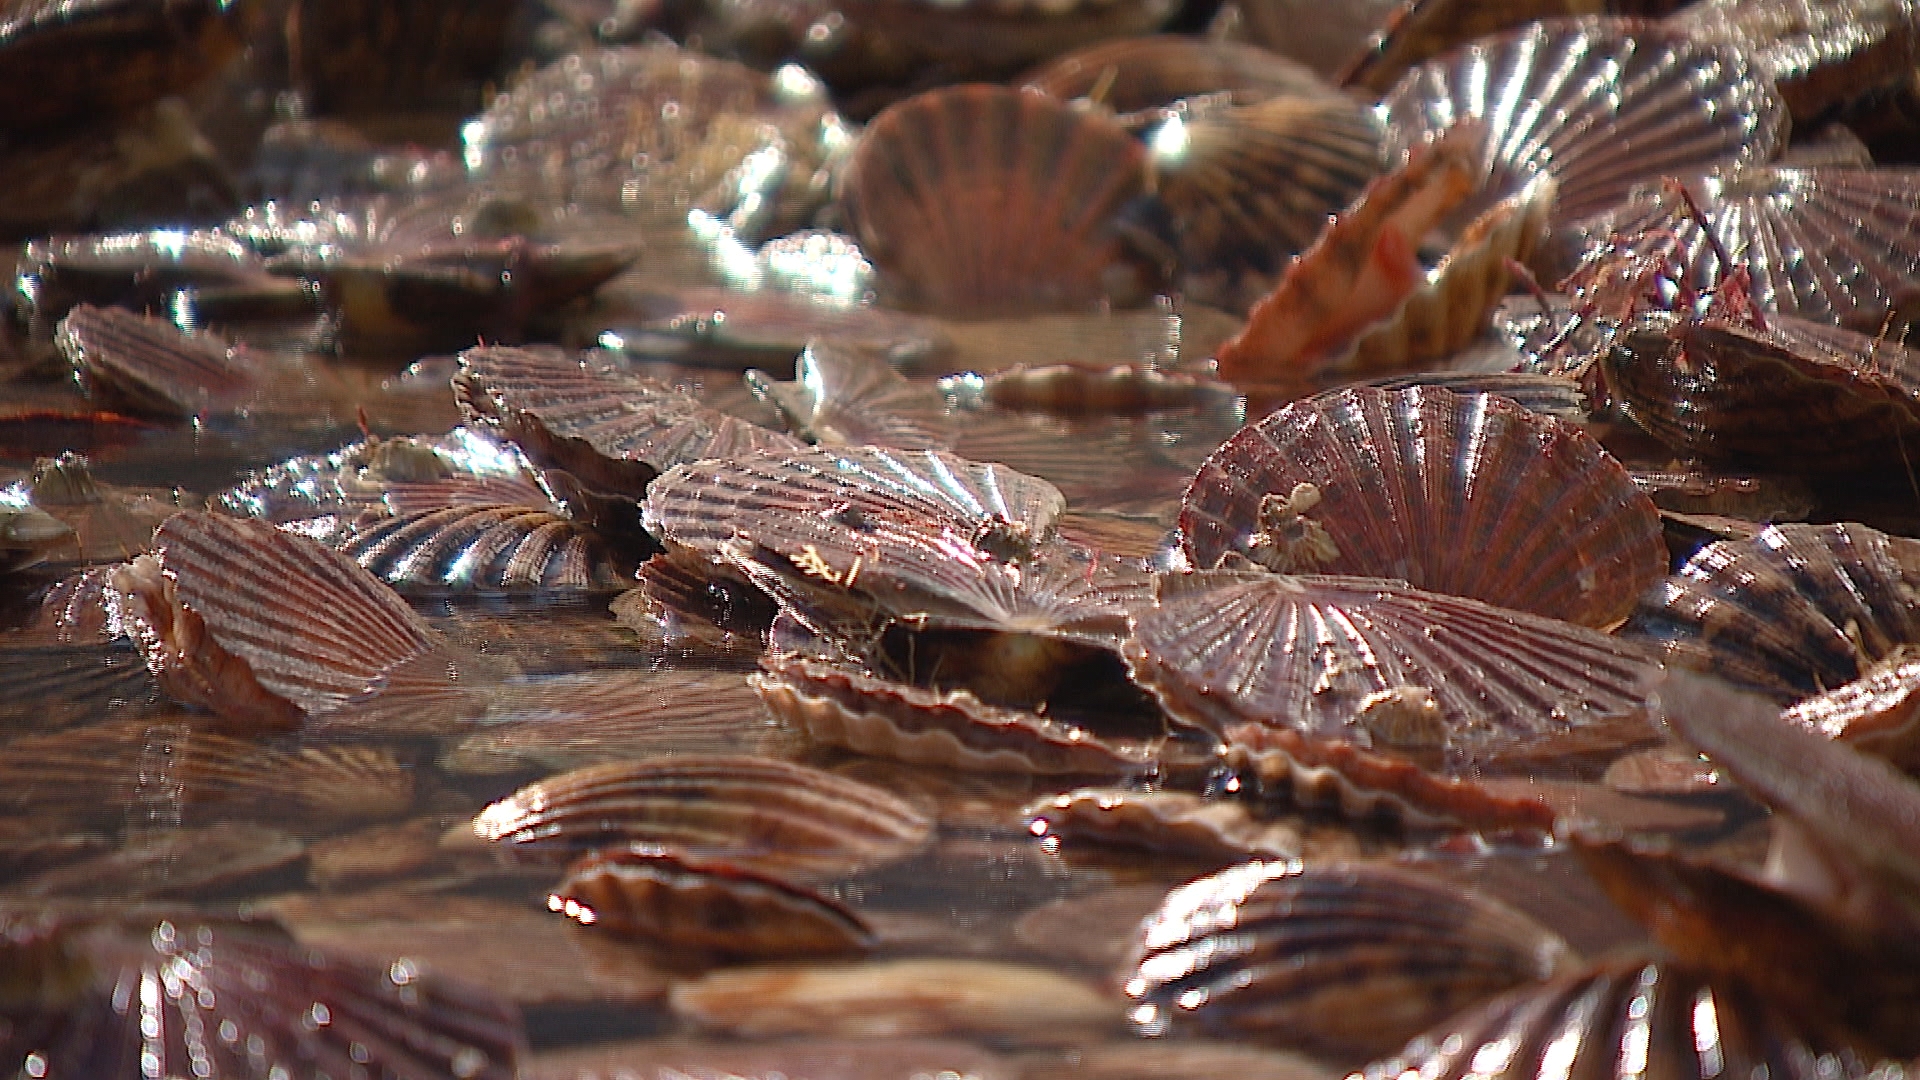 Live scallops at Loch Fyne Seafarms in Tarbert. <strong>(STV News)</strong>”/><span
class=